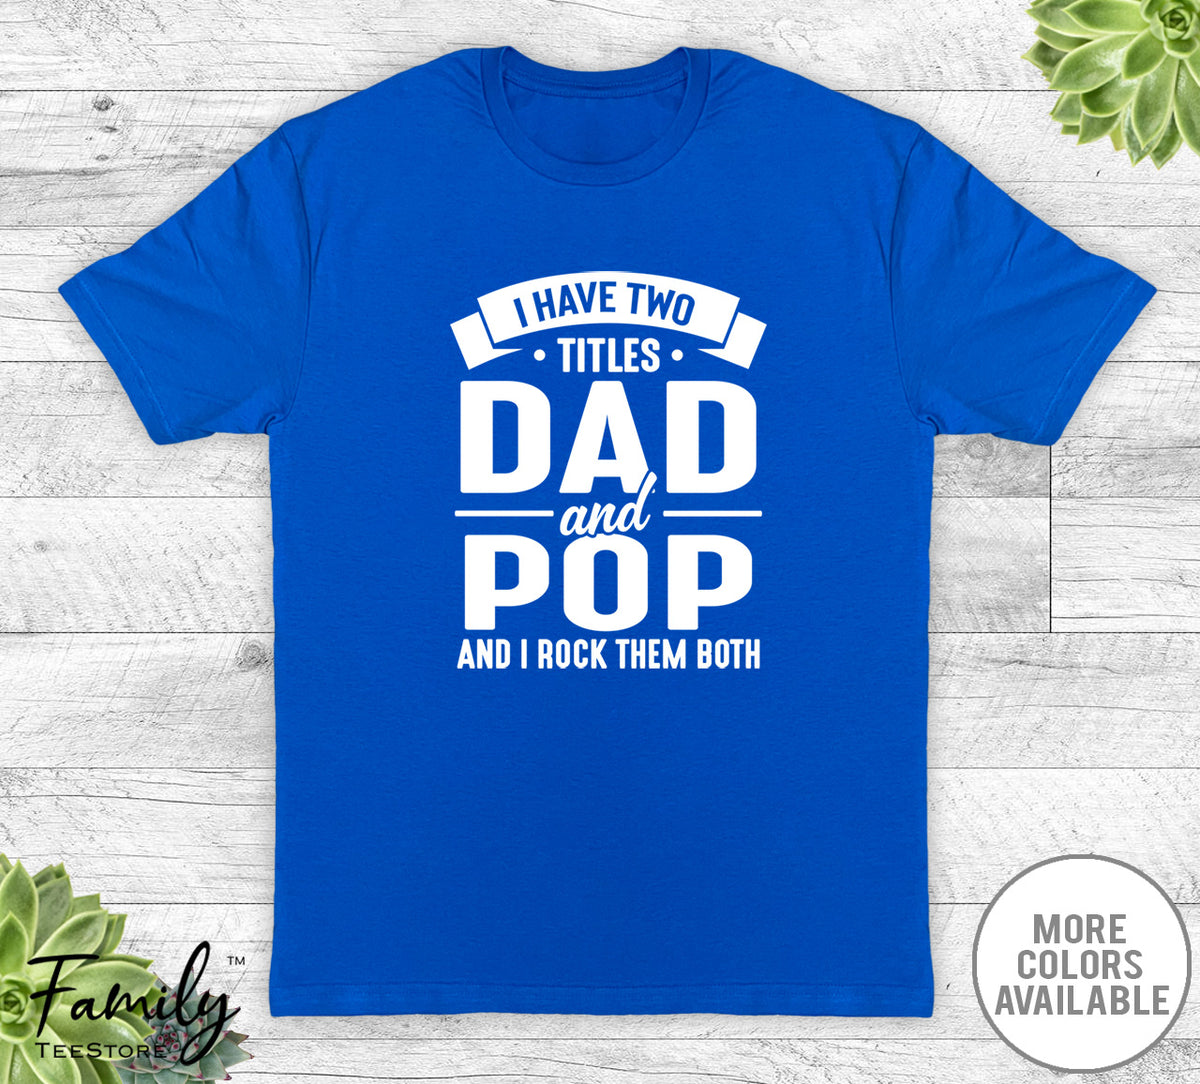 I Have Two Titles Dad And Pop - Unisex T-shirt - Pop Shirt - Funny Pop Gift - familyteeprints